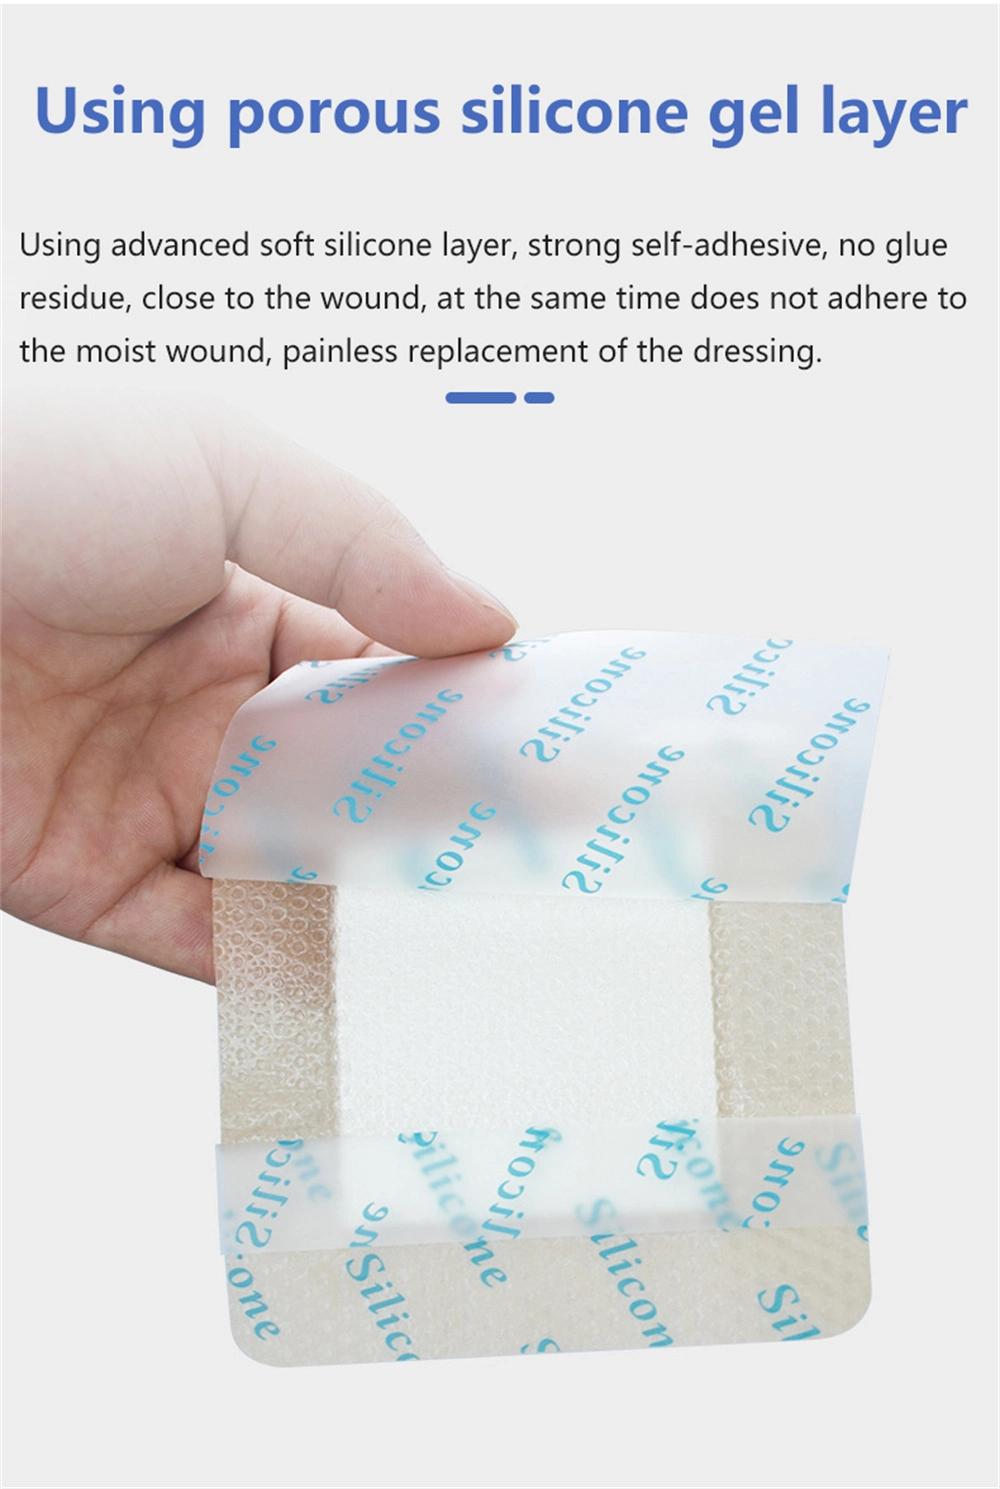 Sterile Adhesive Wound Care Dressing Silicone Cross Dressing